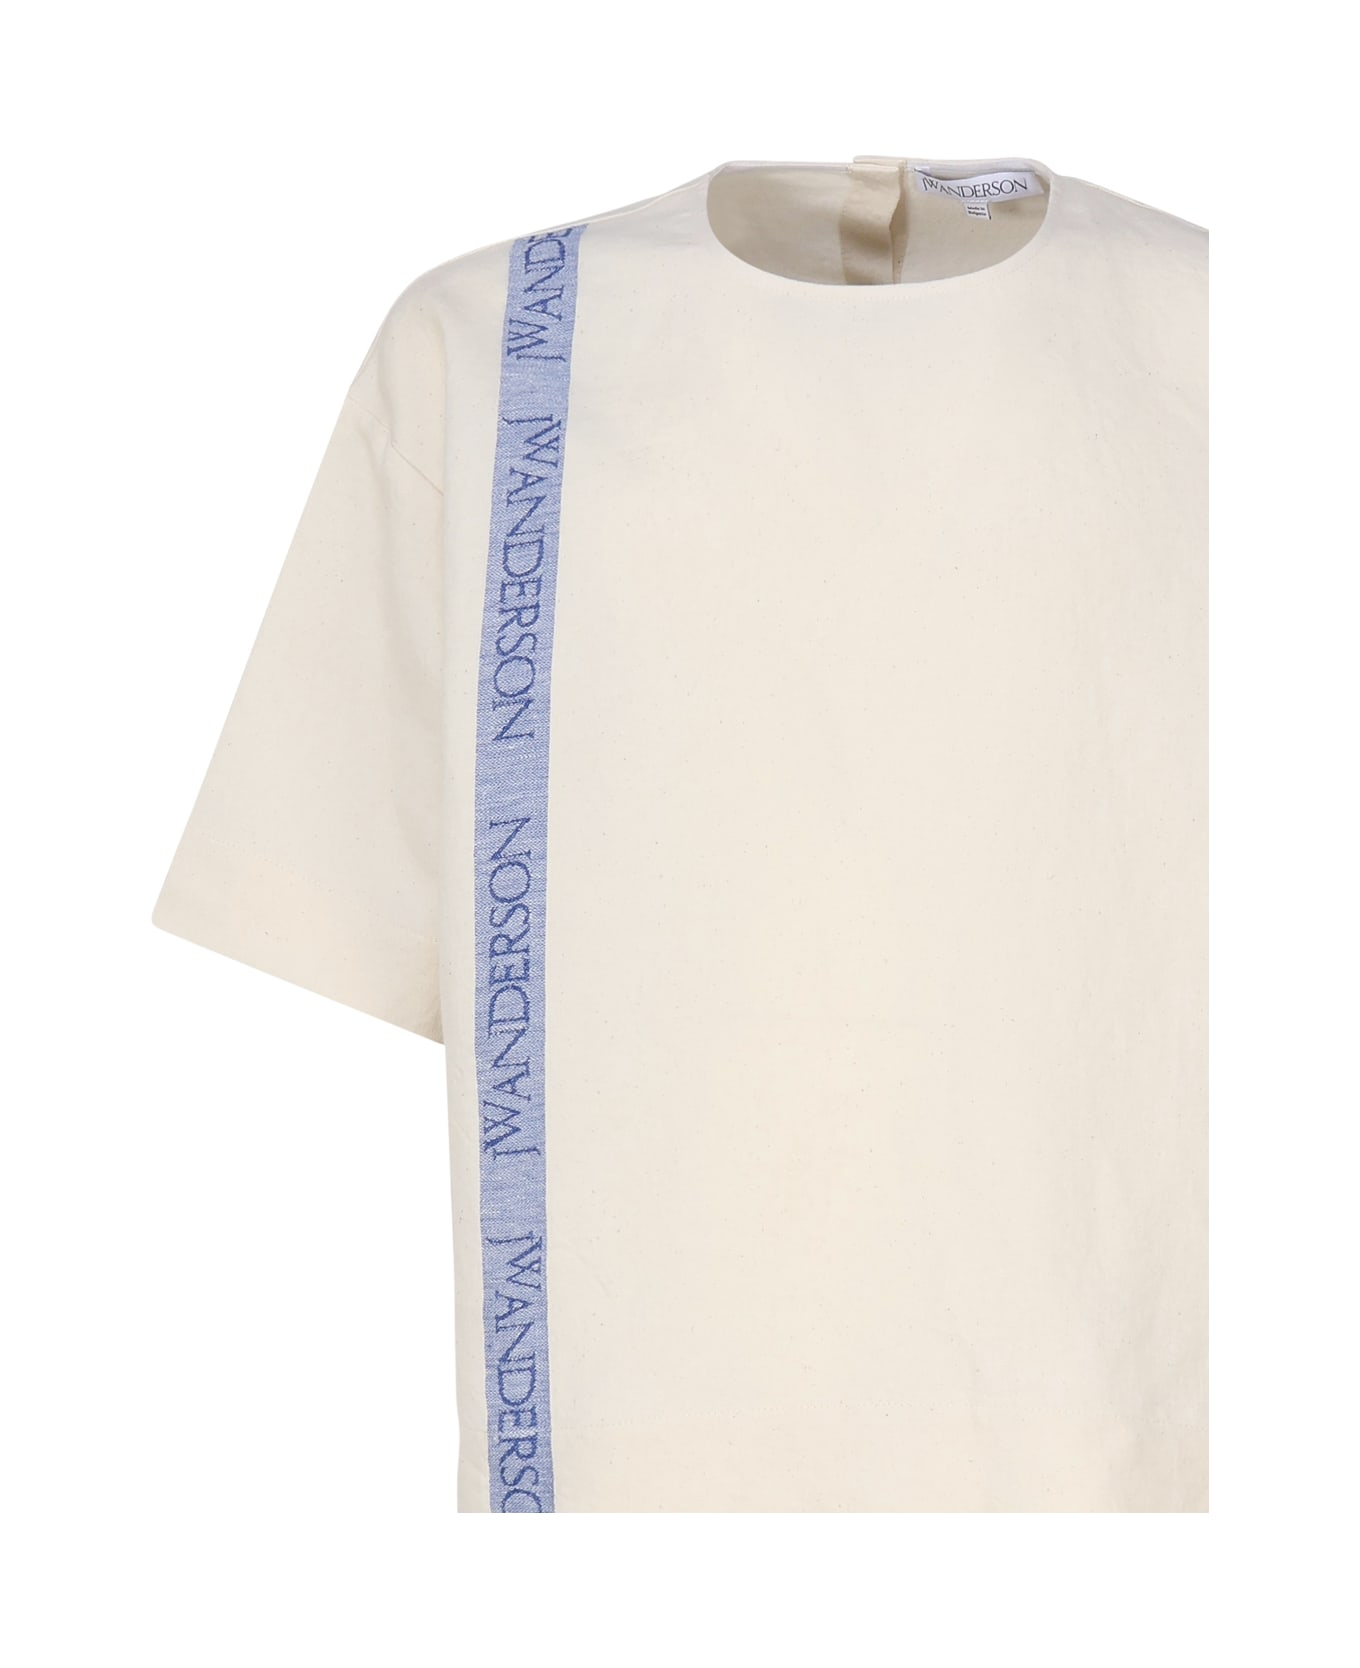 J.W. Anderson T-shirt With Logo - Ivory